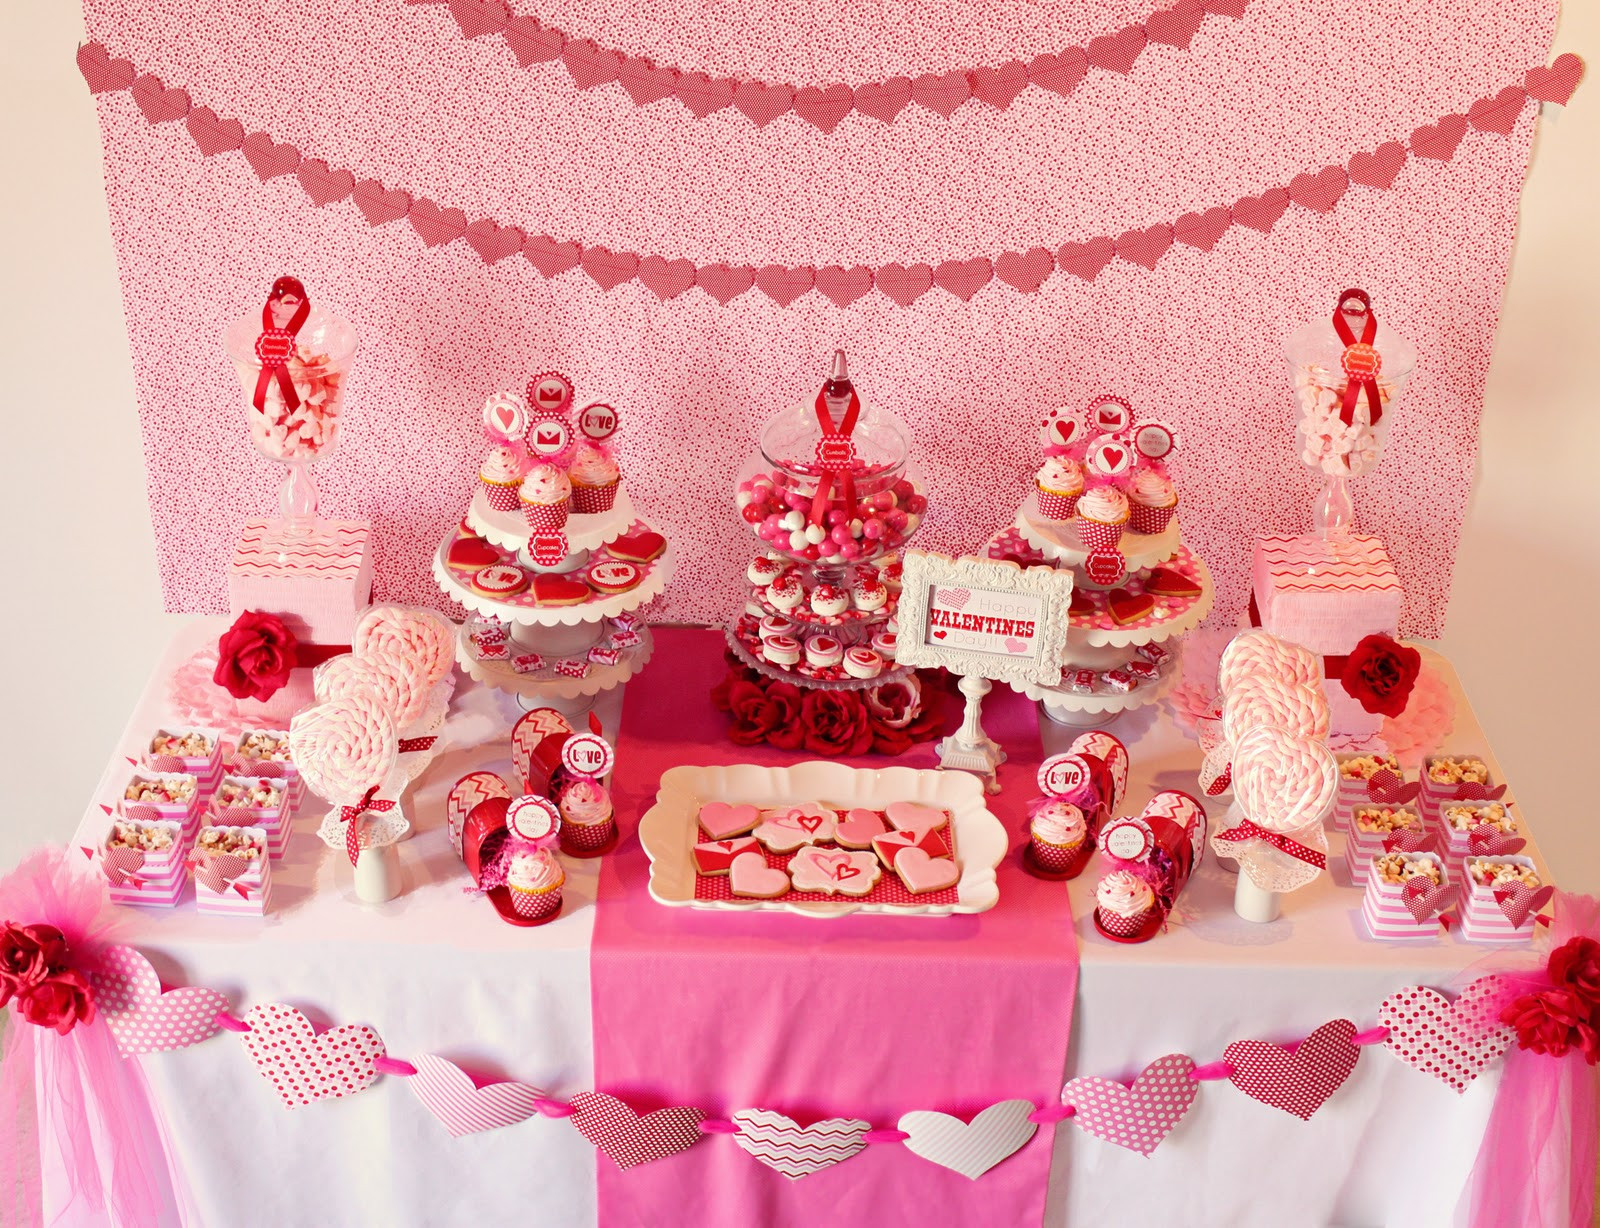 Valentines Day Party Idea
 Amanda s Parties To Go Valentines Party Table Ideas